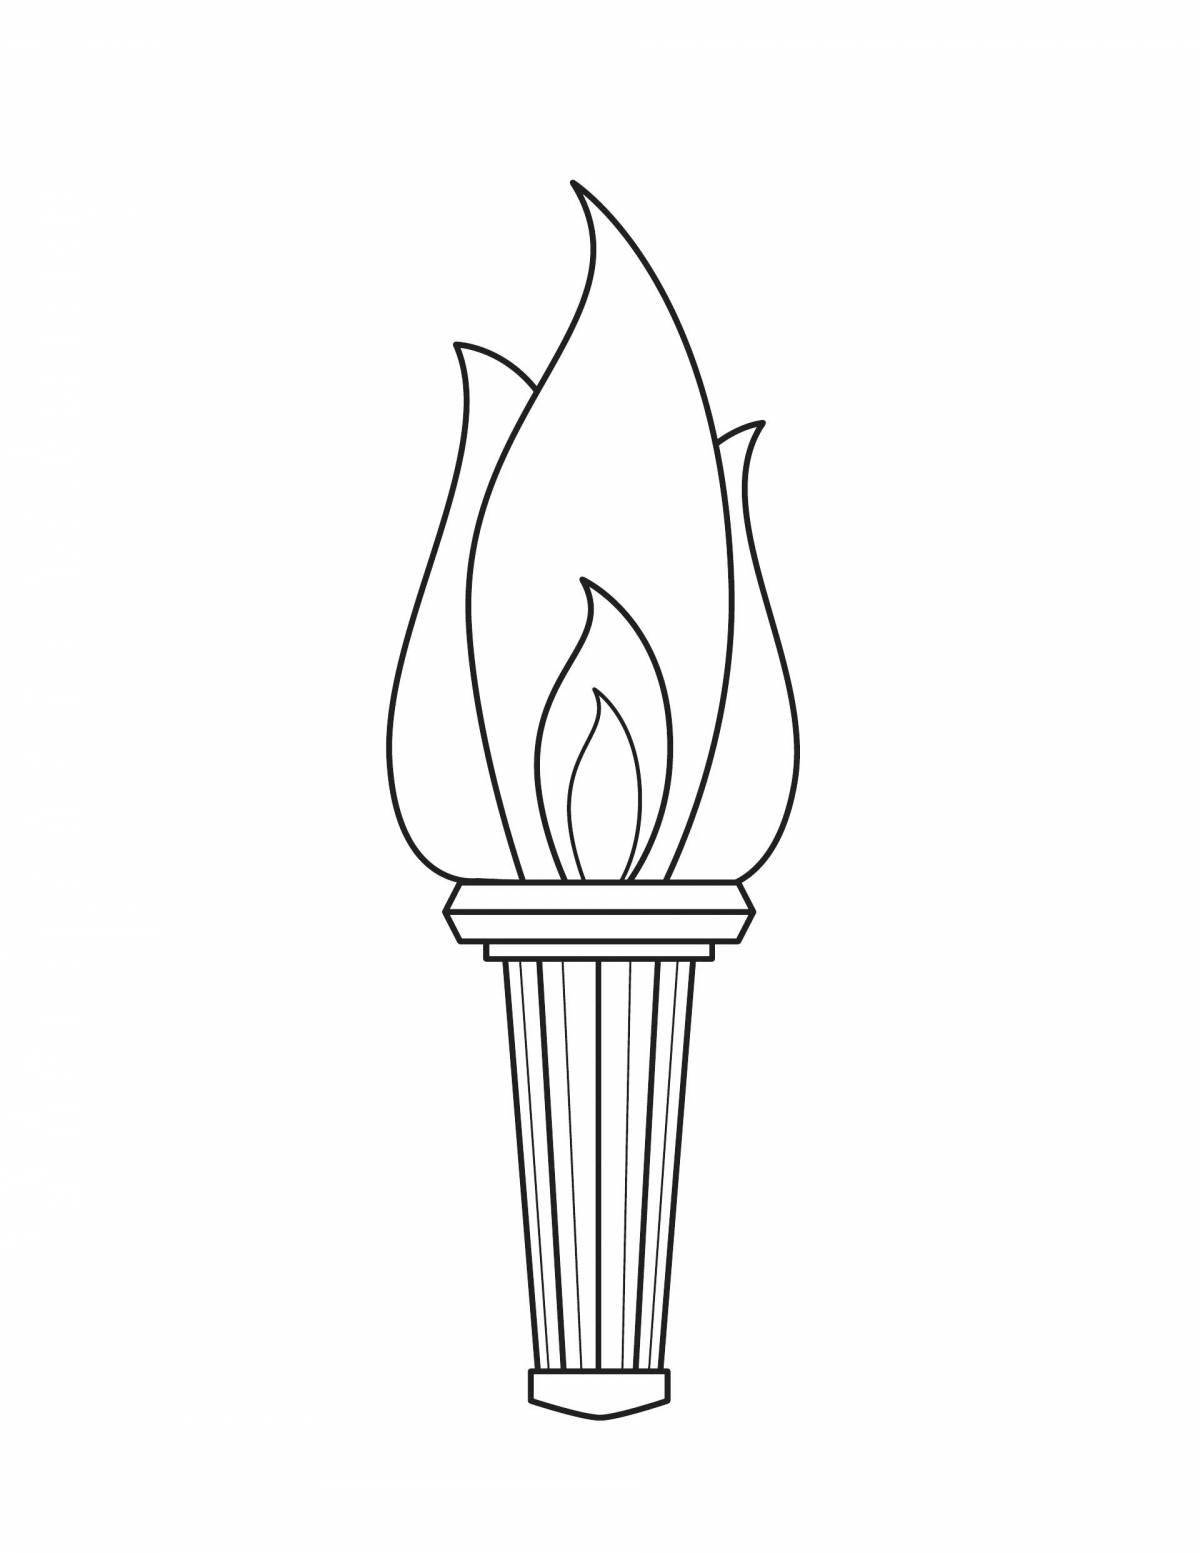 Torch coloring pages for kids